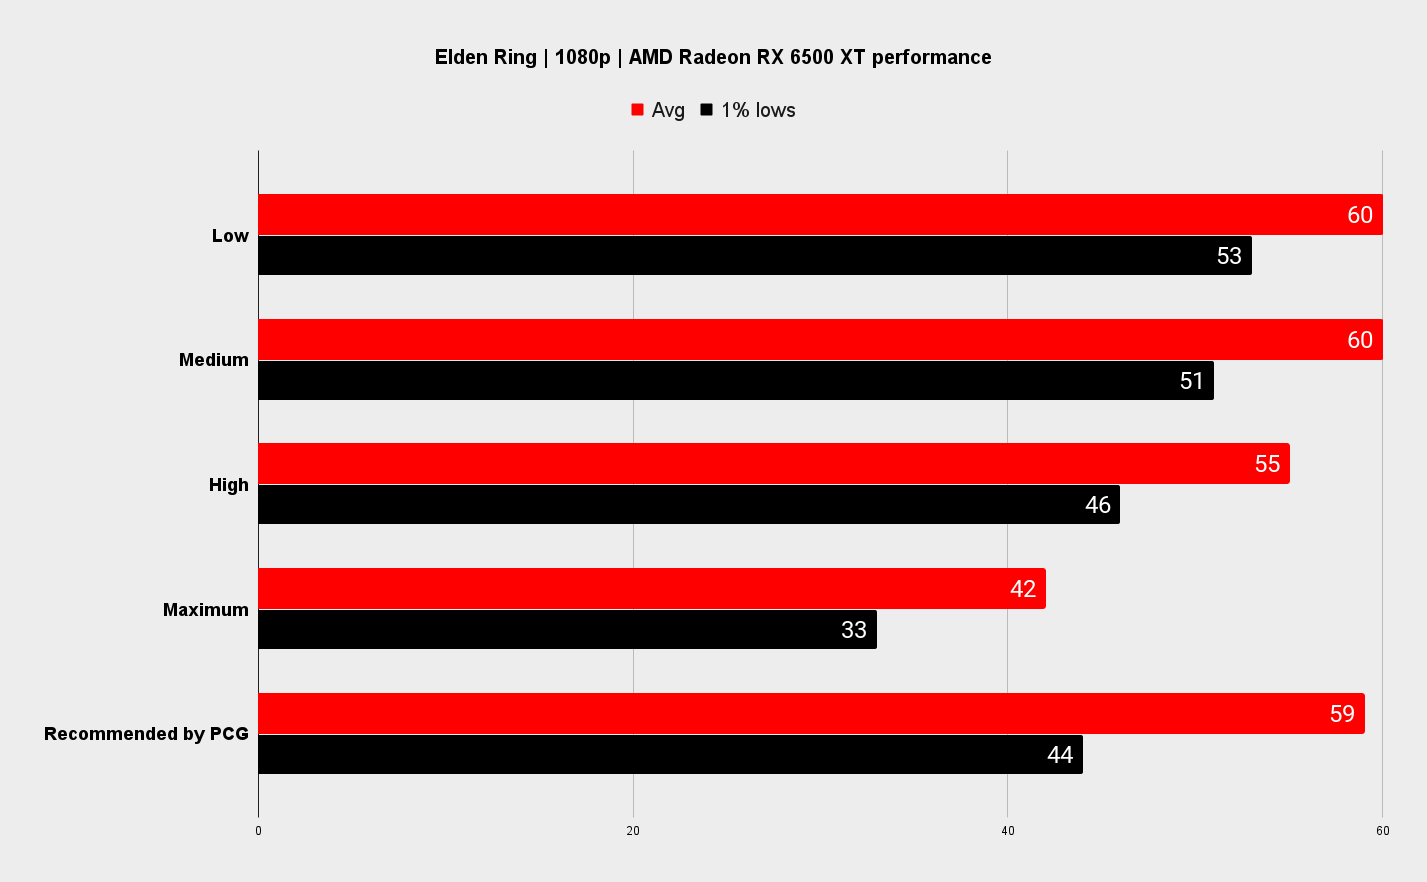 Elden Ring performance at various presets with AMD Radeon RX 6500 XT GPU